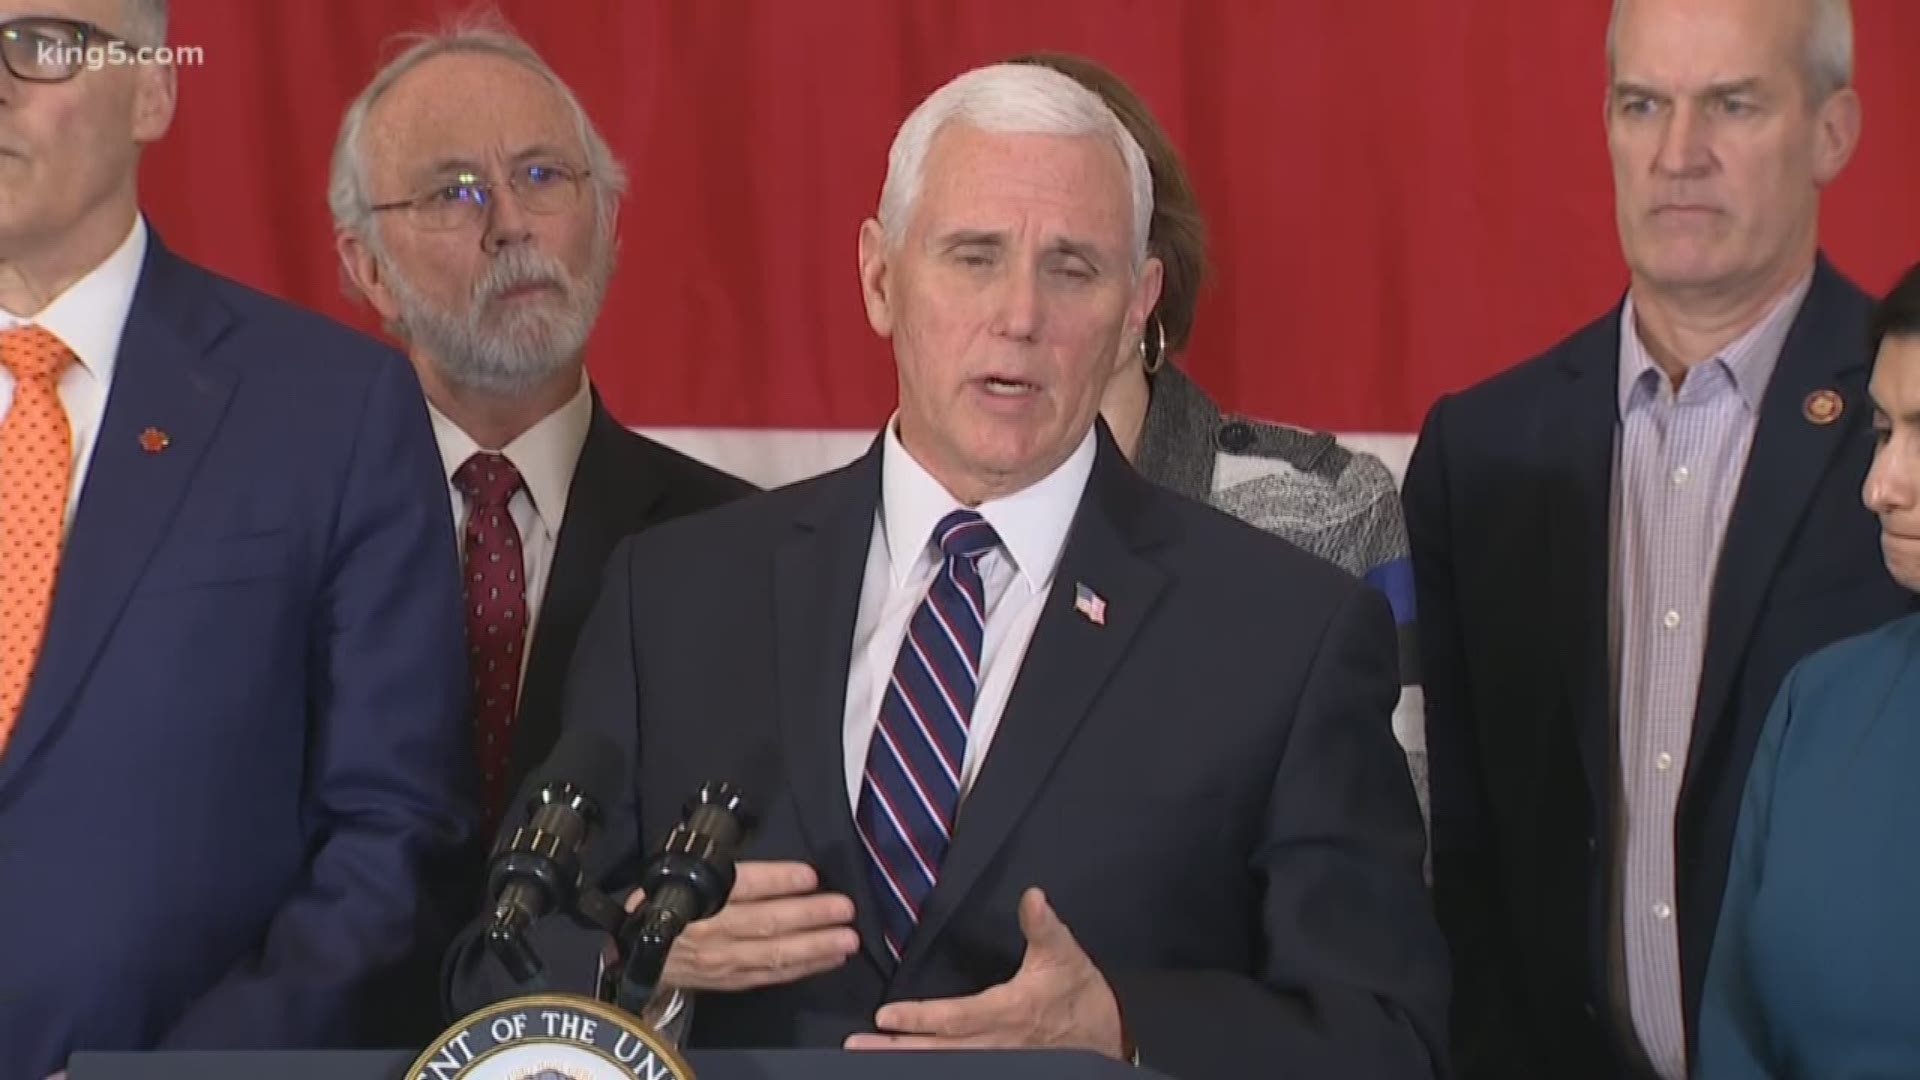 Vice President Mike Pence spoke in Washington state about the coronavirus outbreak.